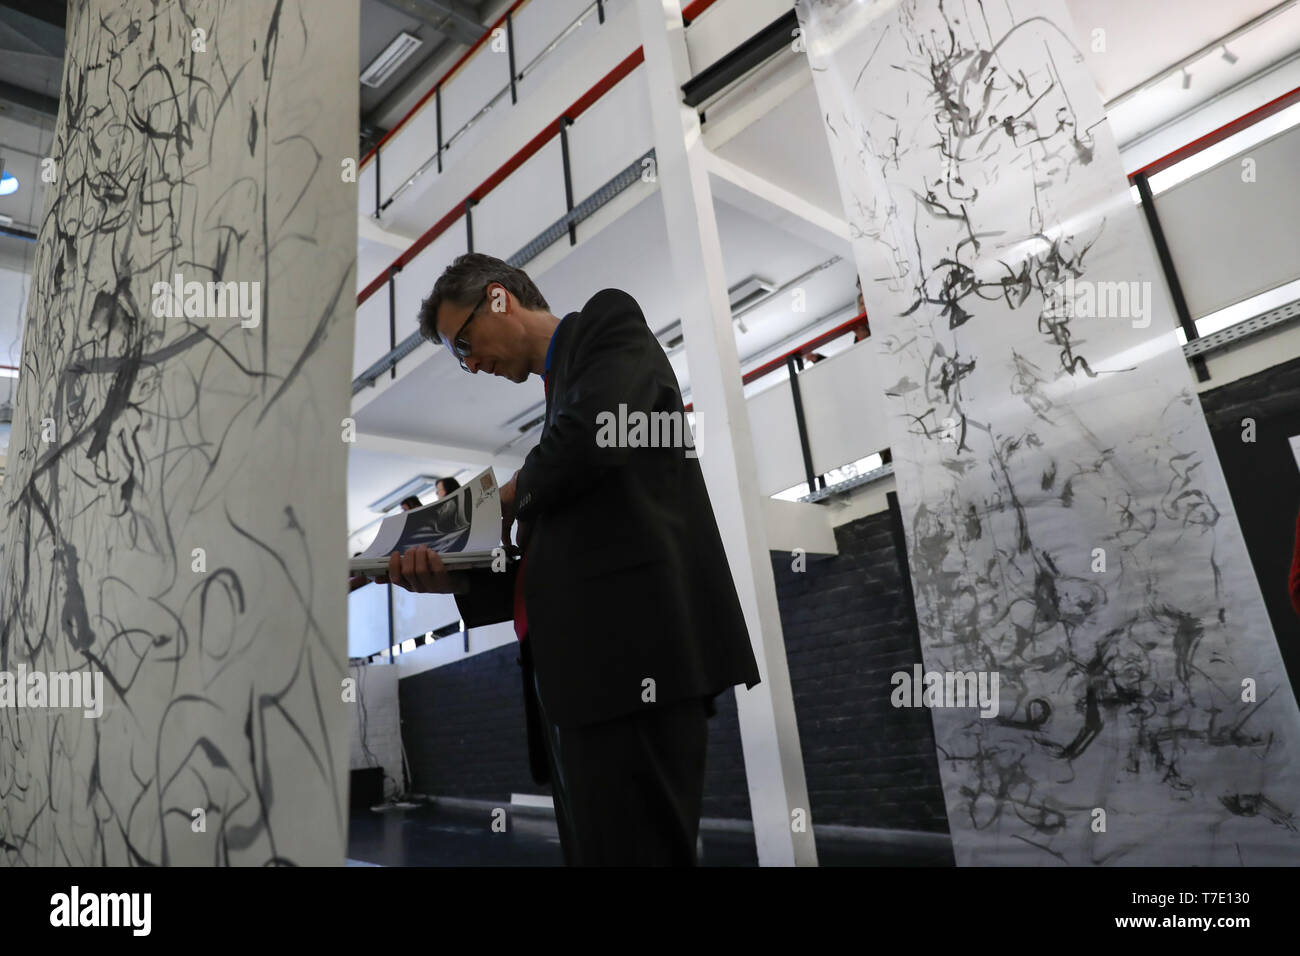 (190507) -- BRUSSELS, May 7, 2019 (Xinhua) -- A visitor views works during the 'Written Landscape, Painted Writing' exhibition in Brussels, Belgium, May 6, 2019. A series of events on contemporary ink entitled 'INK Brussels 2019/Week of Ink' were held at the Faculty of Architecture of the ULB (Universite libre de Bruxelles) since Monday. Featuring an exhibition 'Written Landscape, Painted Writing' and several conferences and workshops, INK Brussels 2019 aims to explore the role ink painting and calligraphy plays in abstractionism. With works of ink from 50 artists, the exhibition will last unt Stock Photo